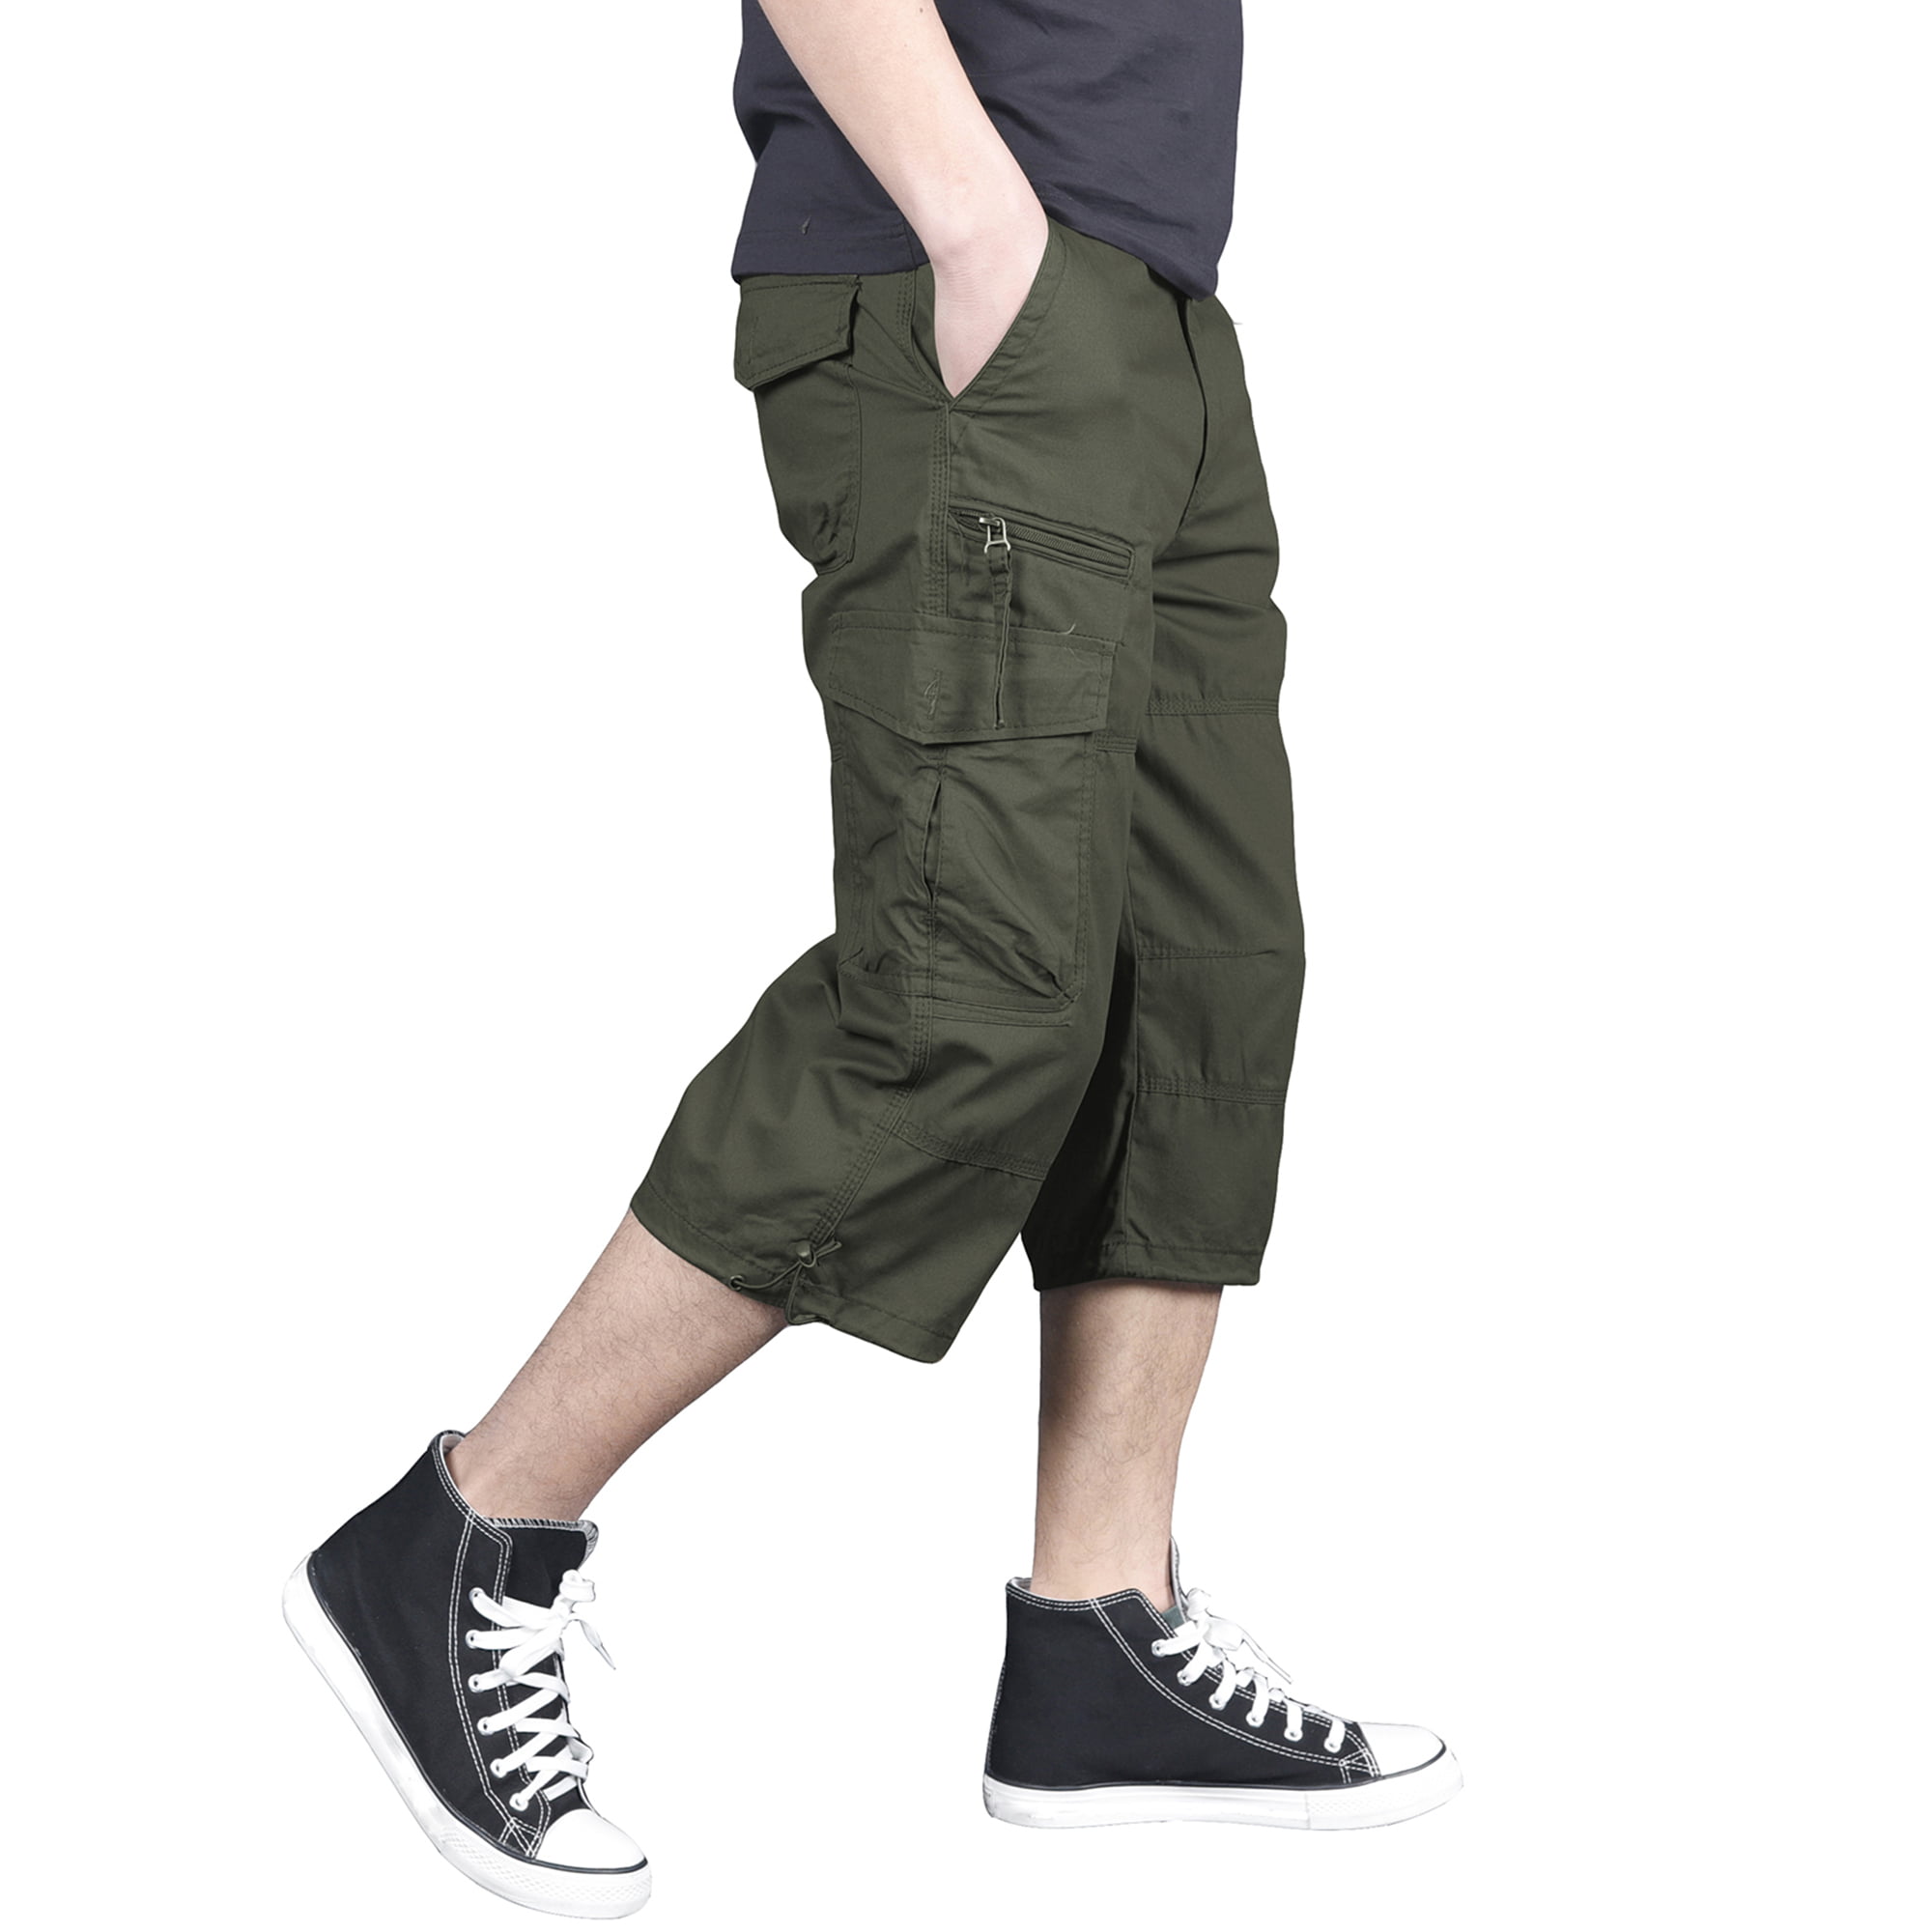 Buy FEDTOSING 3/4 Casual Cargo Shorts for Men Loose Fit Twill 17